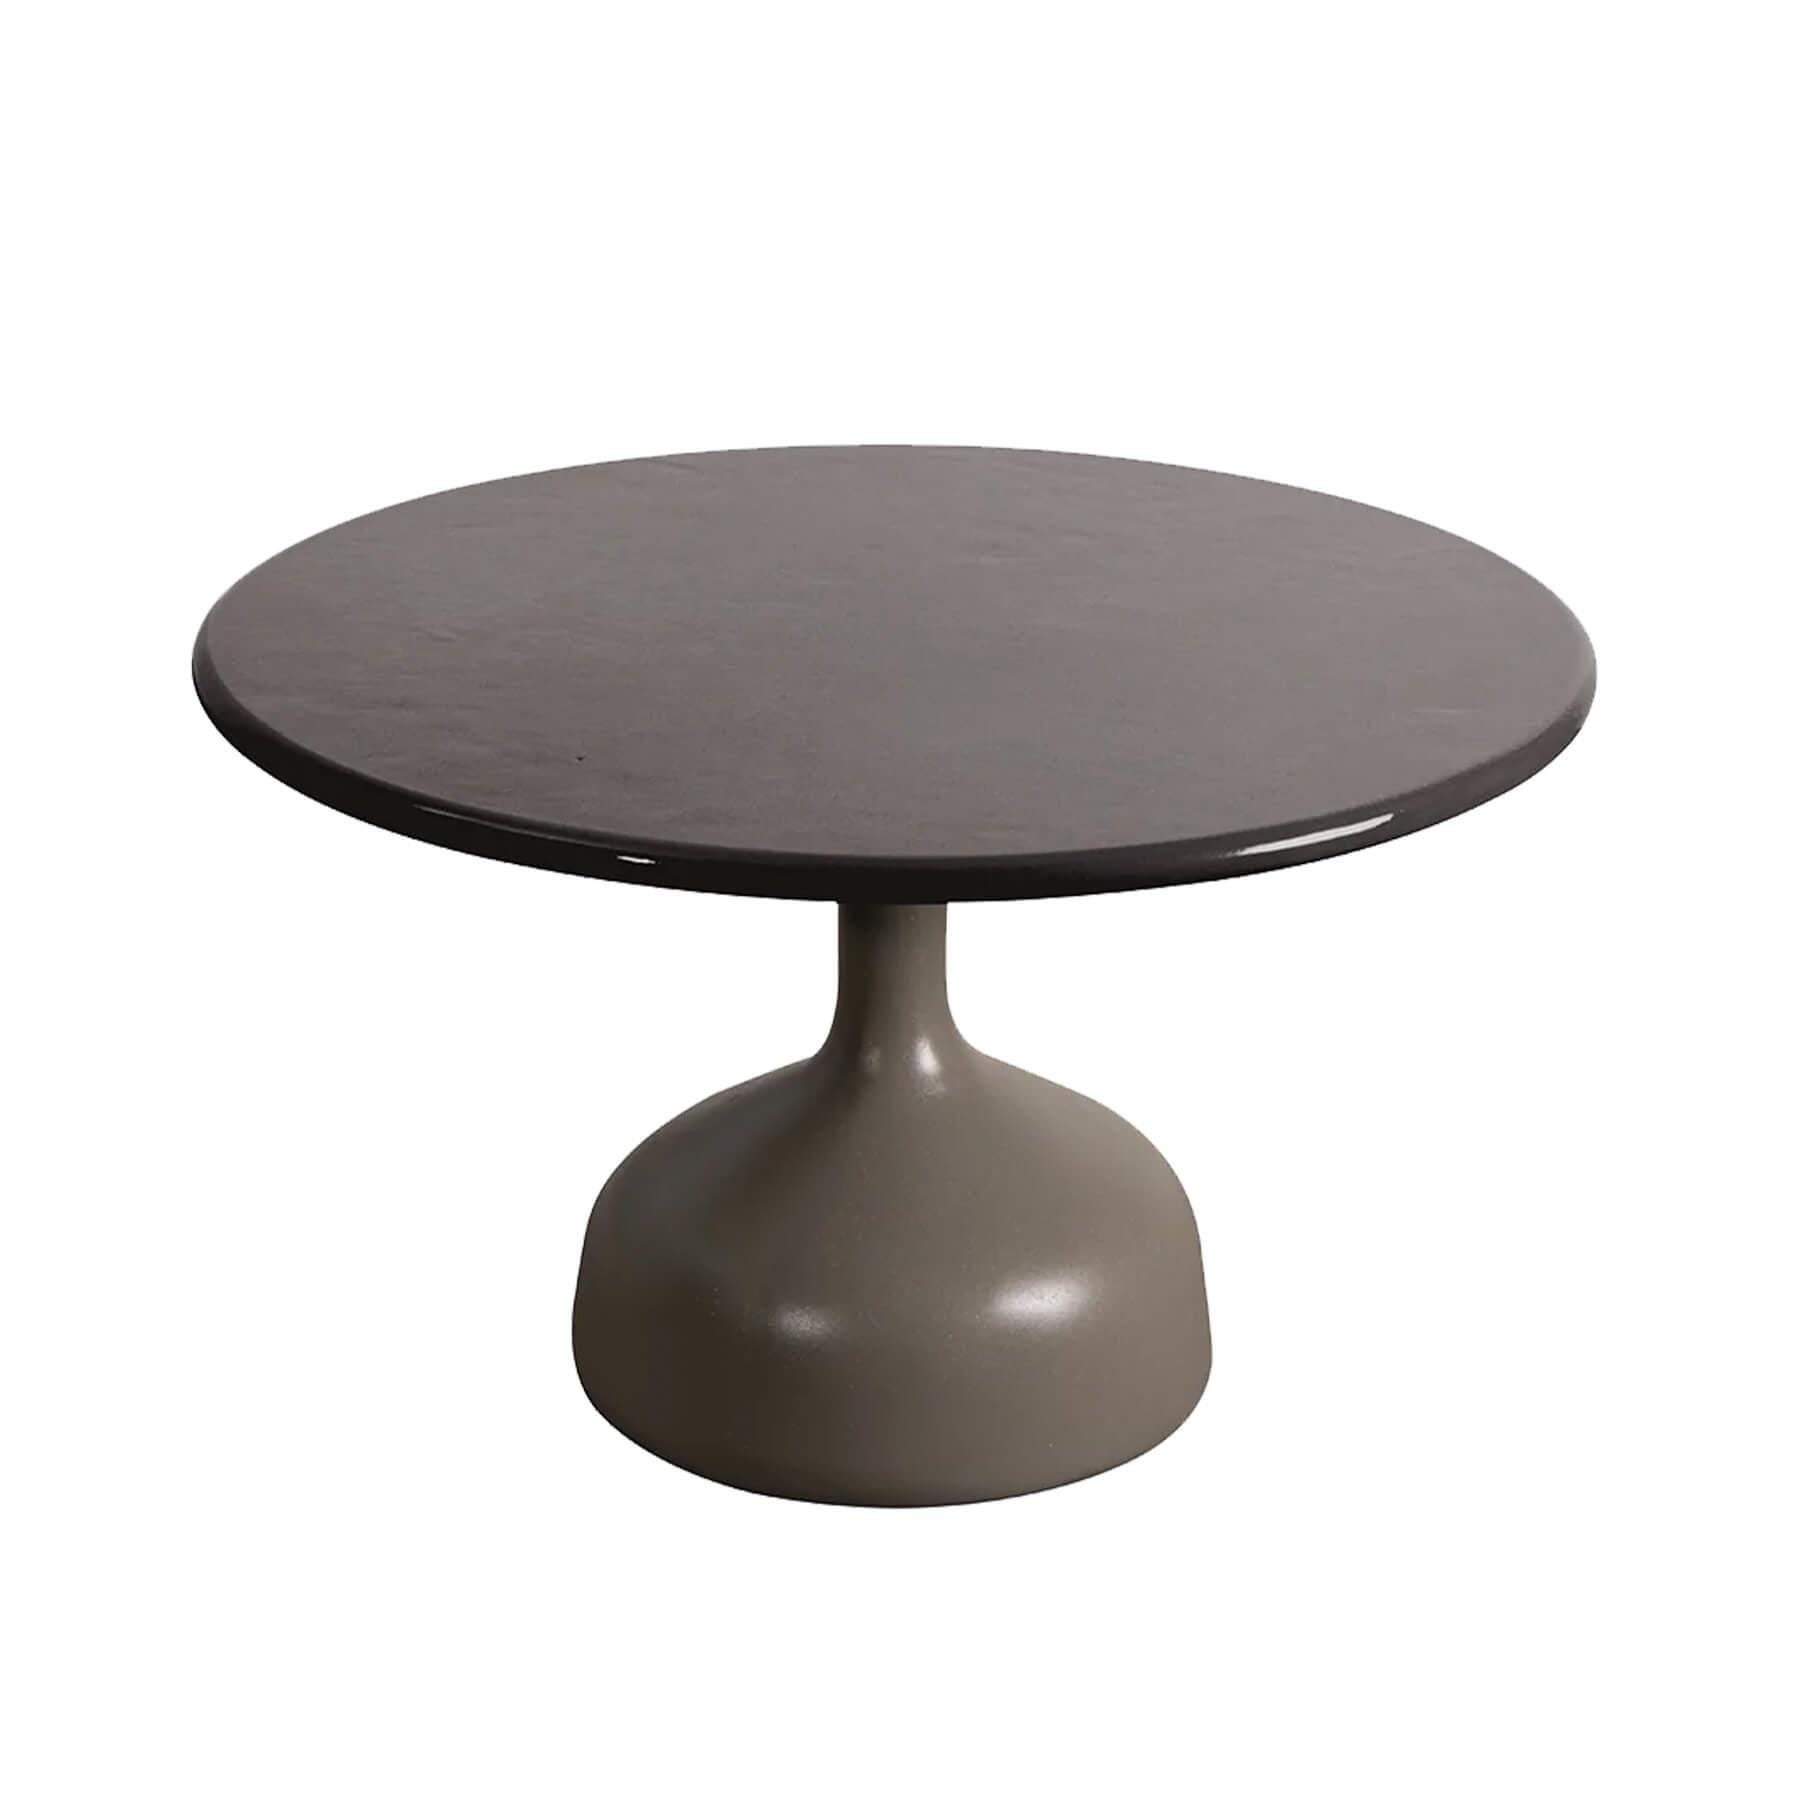 Caneline Glaze Coffee Table Large Taupe Base Black Lava Stone Top Designer Furniture From Holloways Of Ludlow